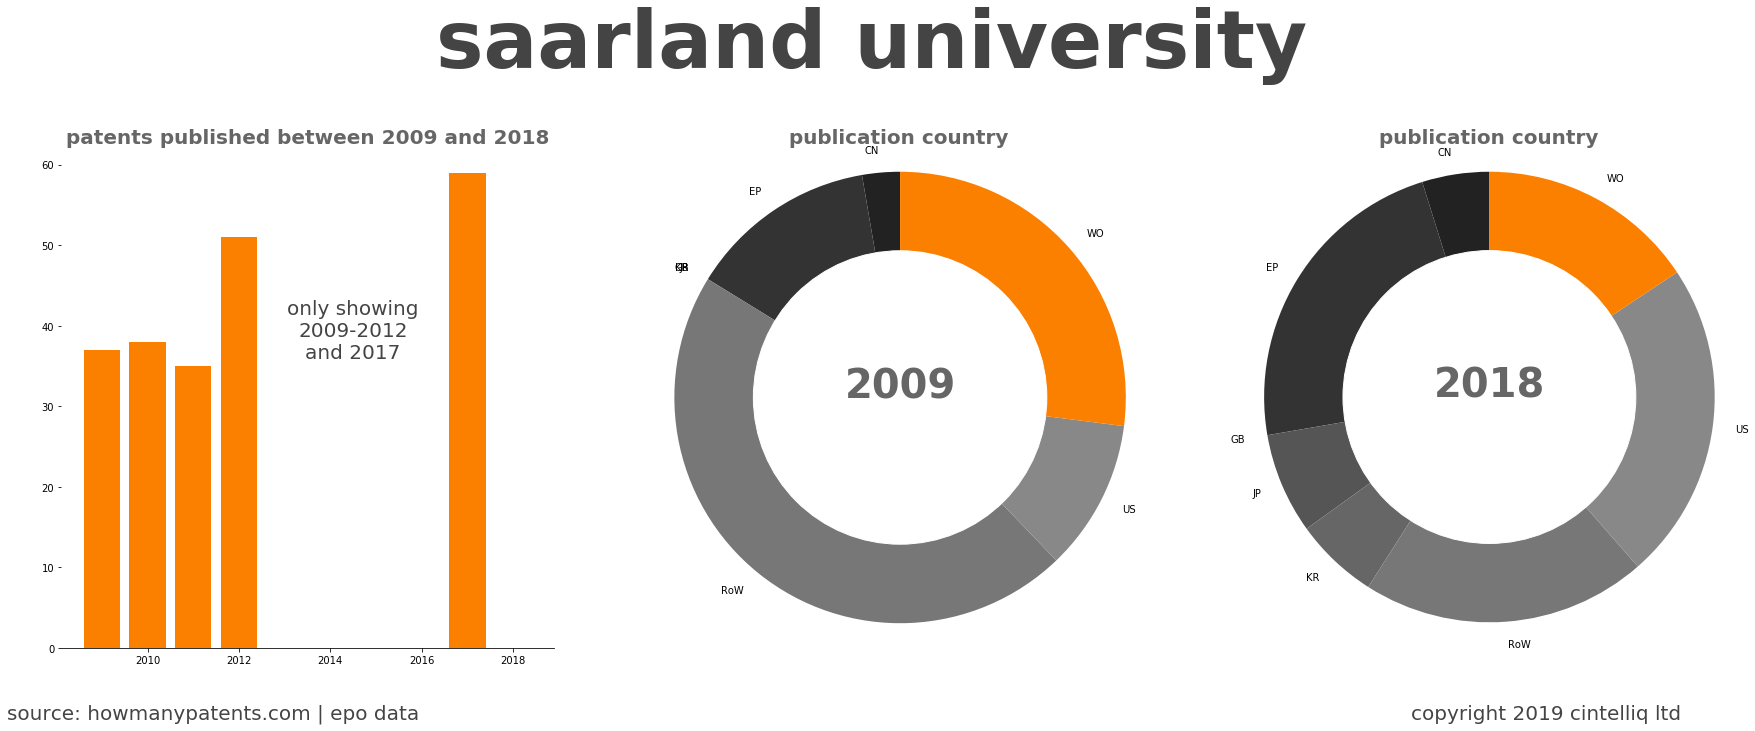 summary of patents for Saarland University